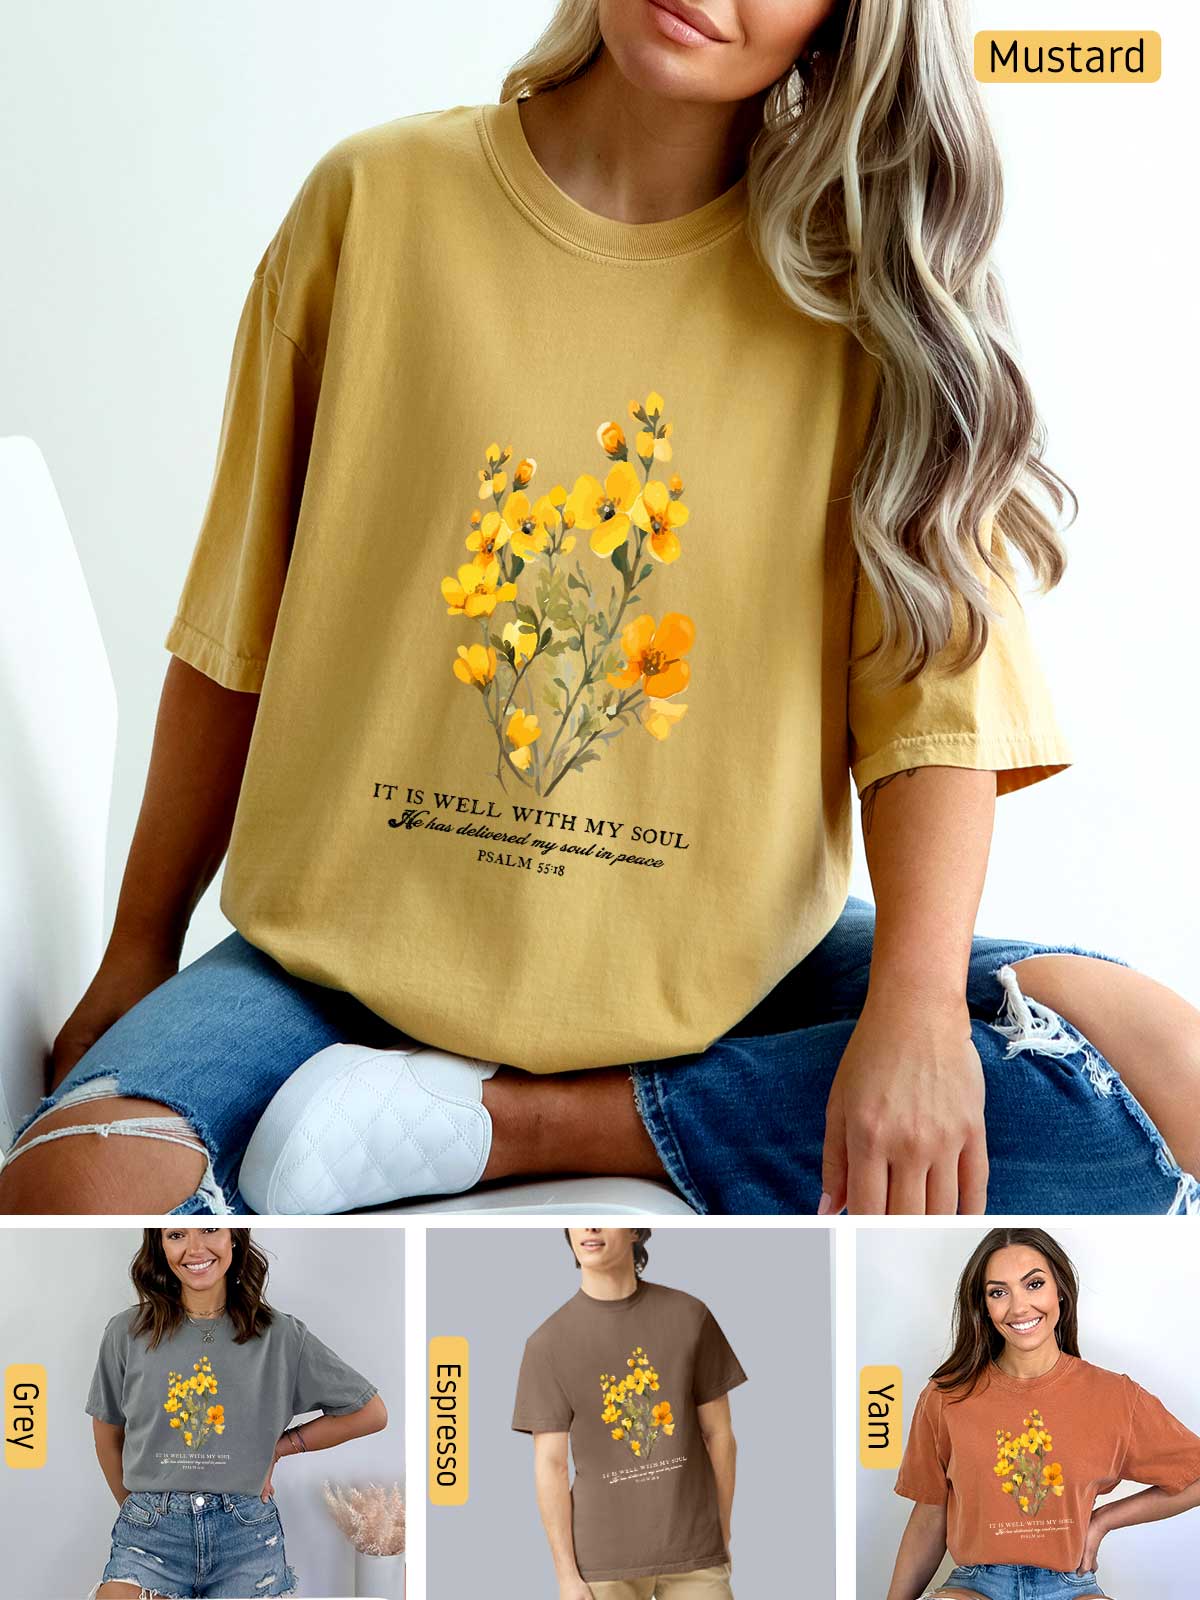 a woman wearing a mustard colored shirt with flowers on it